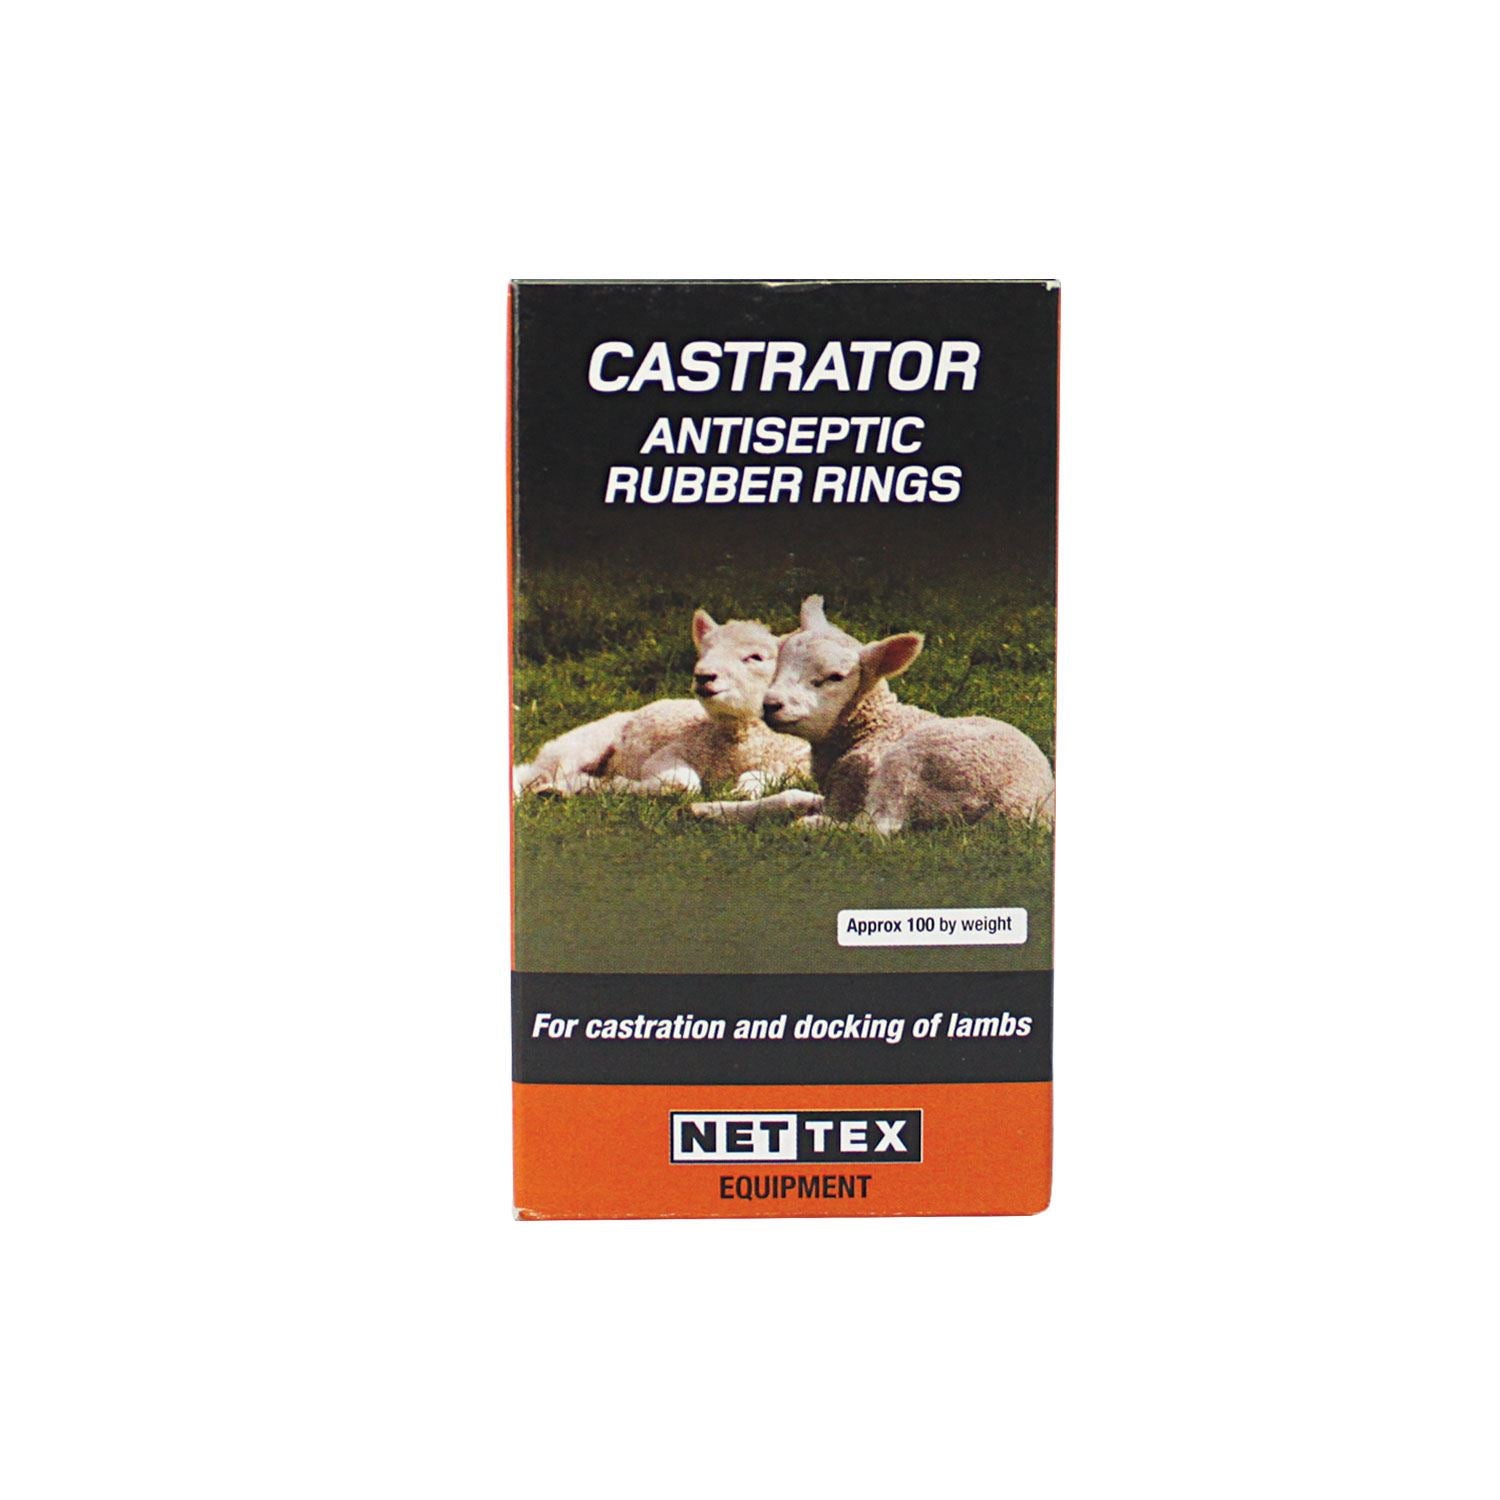 Nettex Castrator Antiseptic Rubber Rings - Just Horse Riders